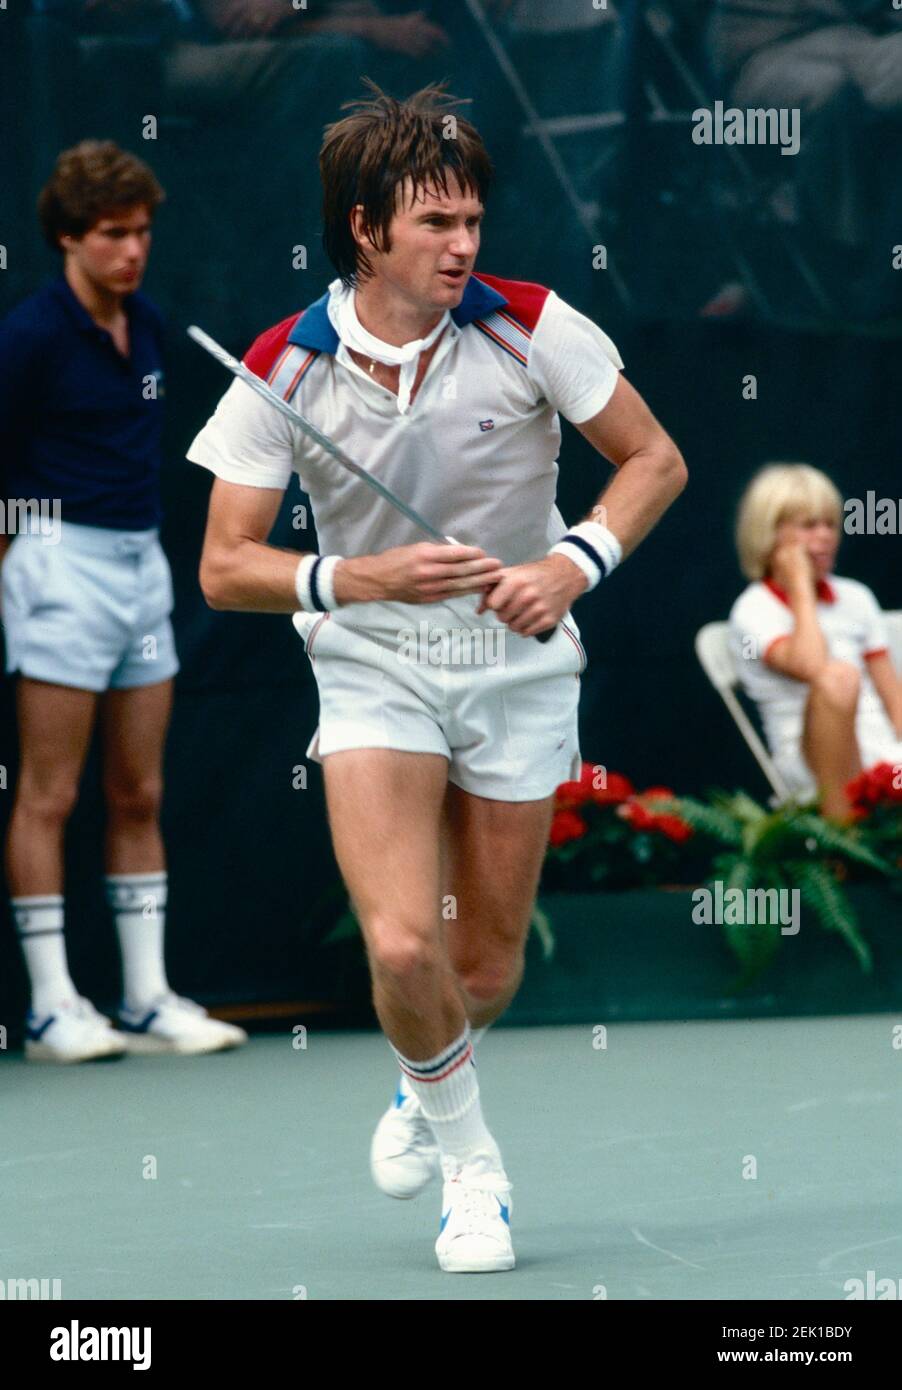 American tennis player Jimmy Connors, US Open 1991 Stock Photo - Alamy